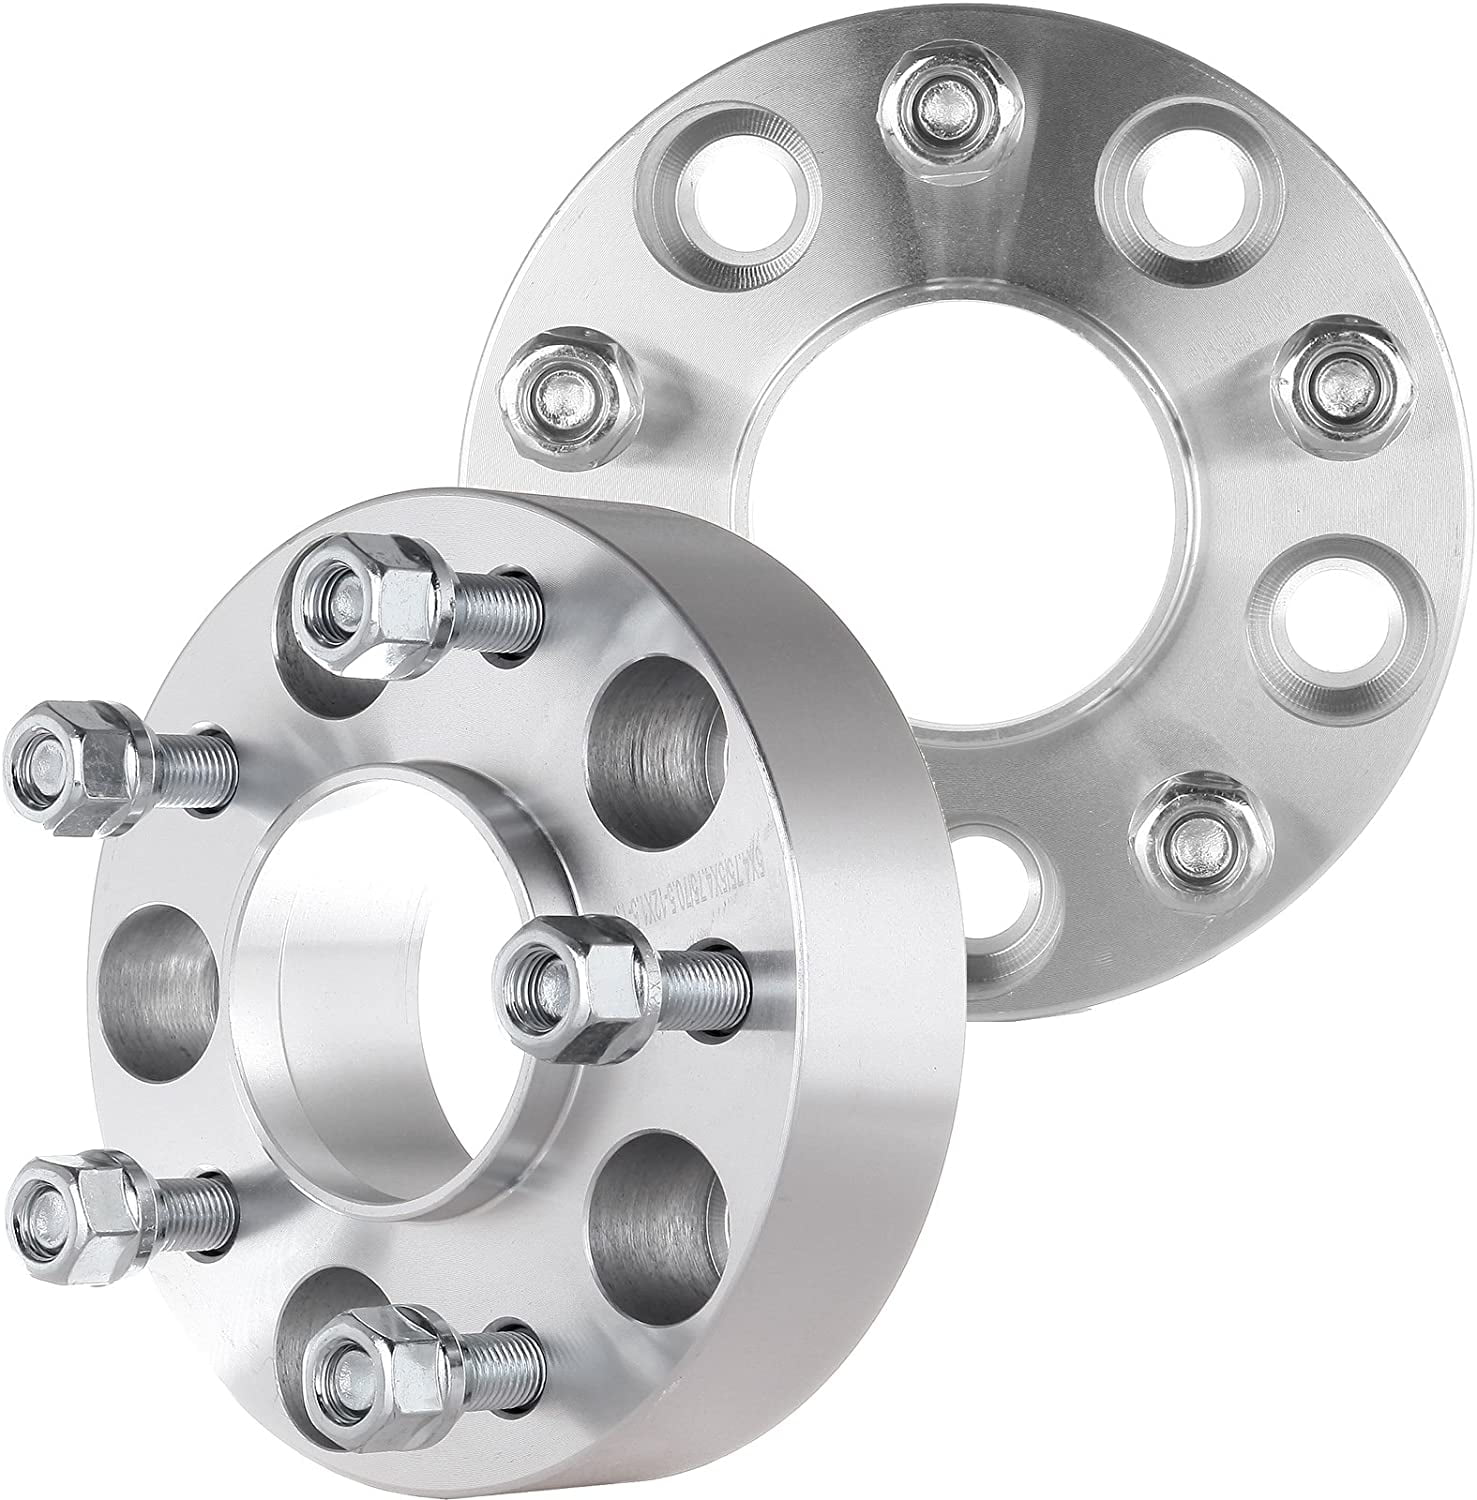 ECCPP 4x 5 lug Wheel Spacers Hubcentric 5x4.75 to 5x4.75 3 Wheel Spacers Adapter 5 Lug Fits for Ch-evr-olet Camaro for Ch-ev-y Blazer for Cadillac XLR with 12x1.5 Studs